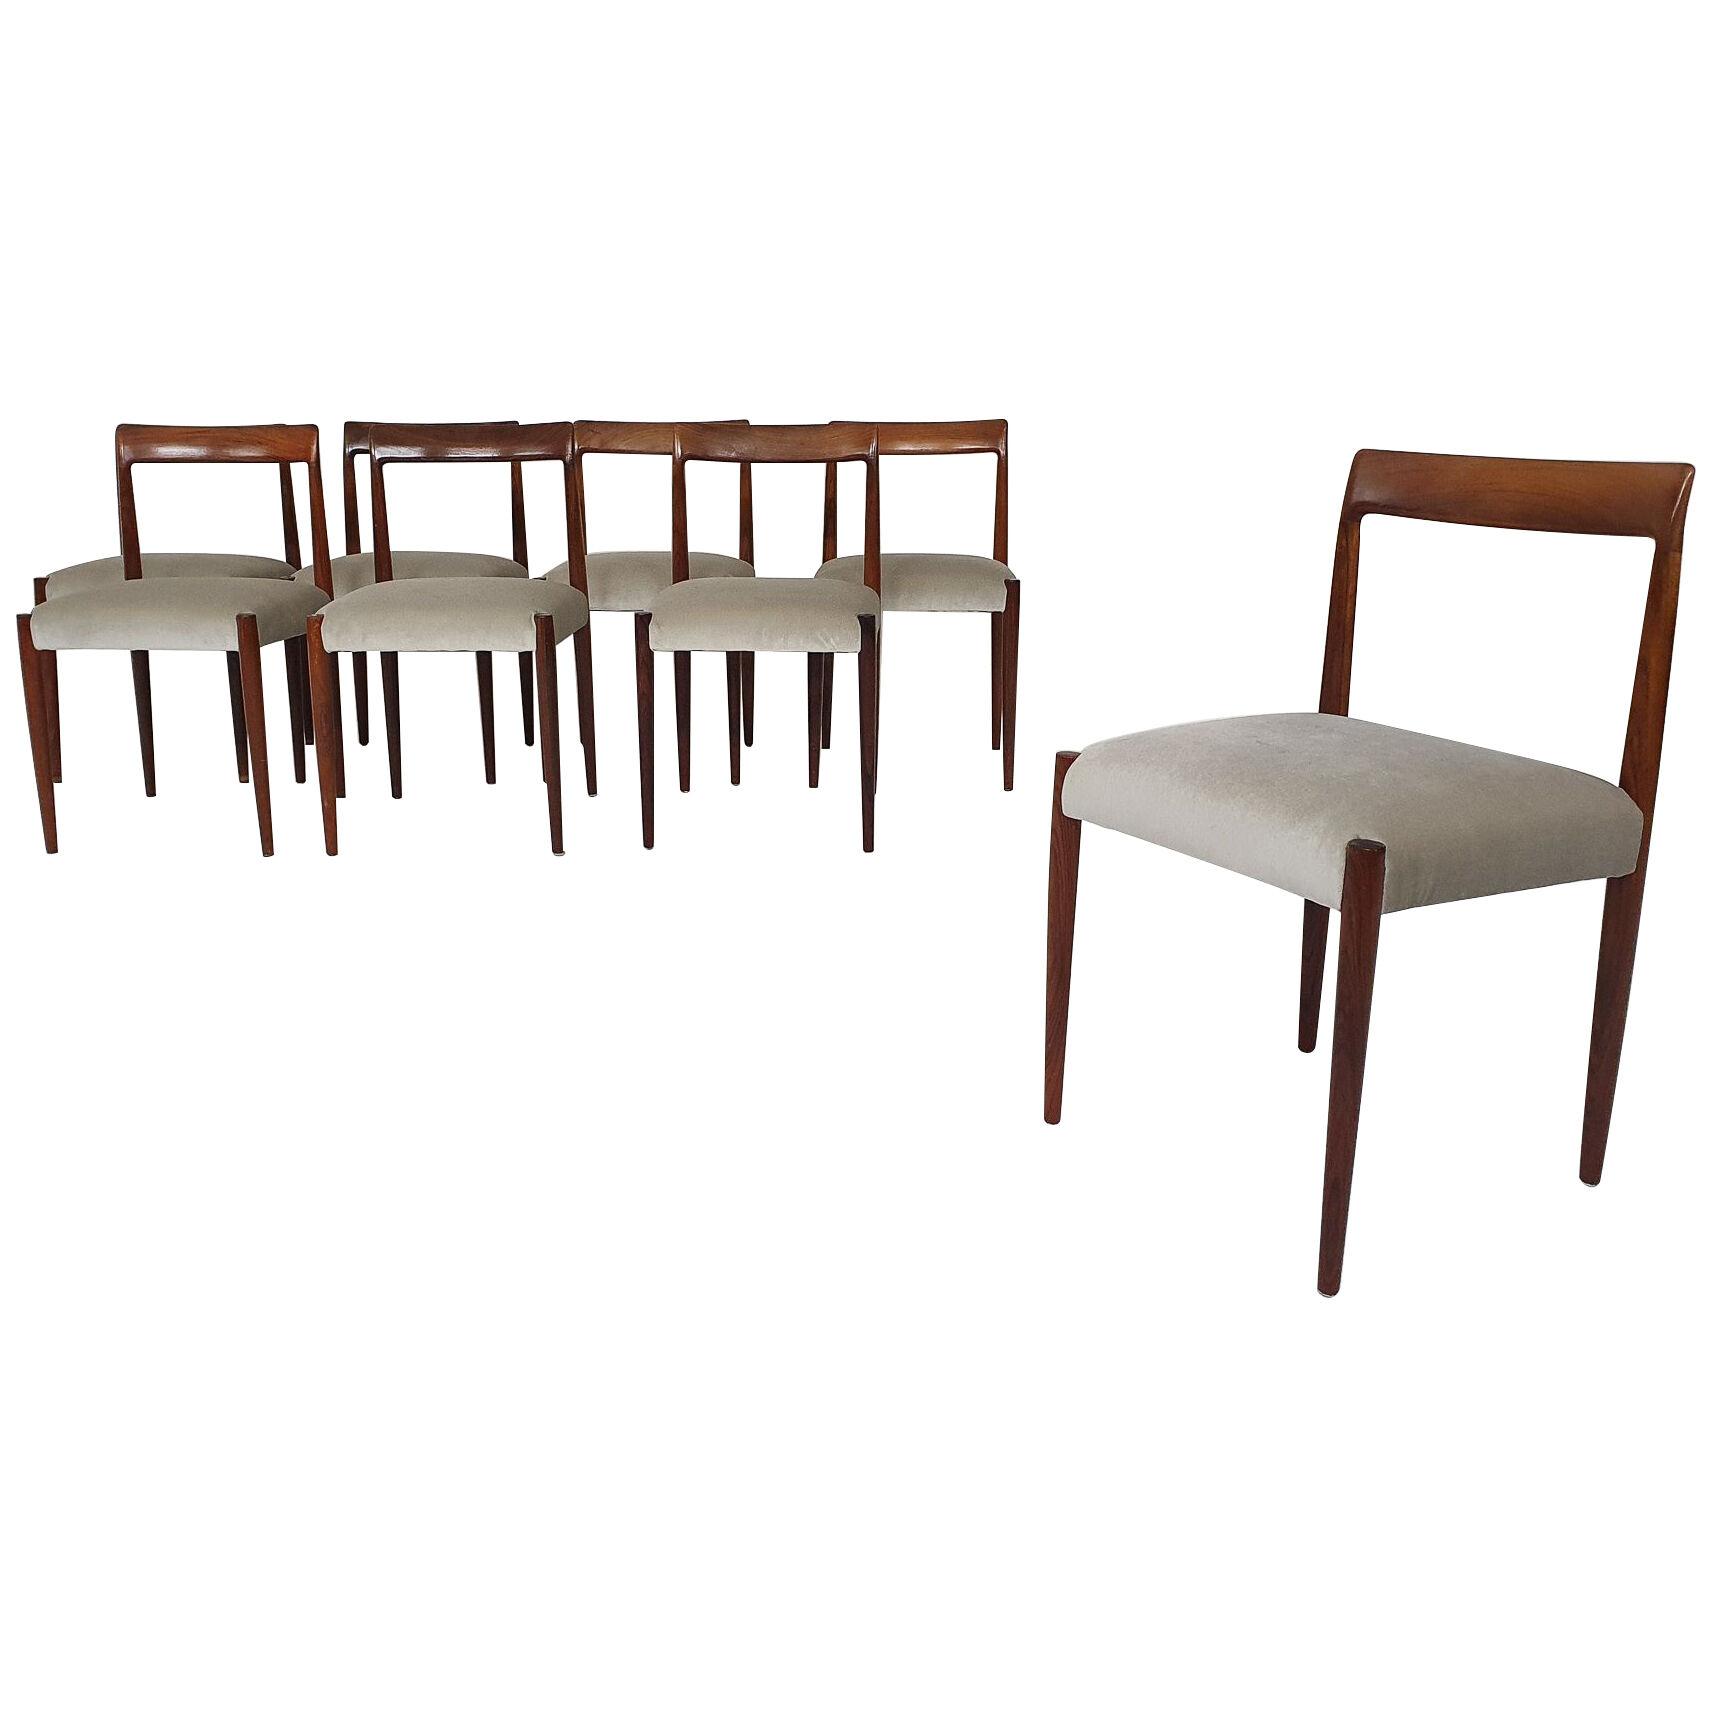 Set of eight rosewood dining chairs by Lubke, Germany 1960's